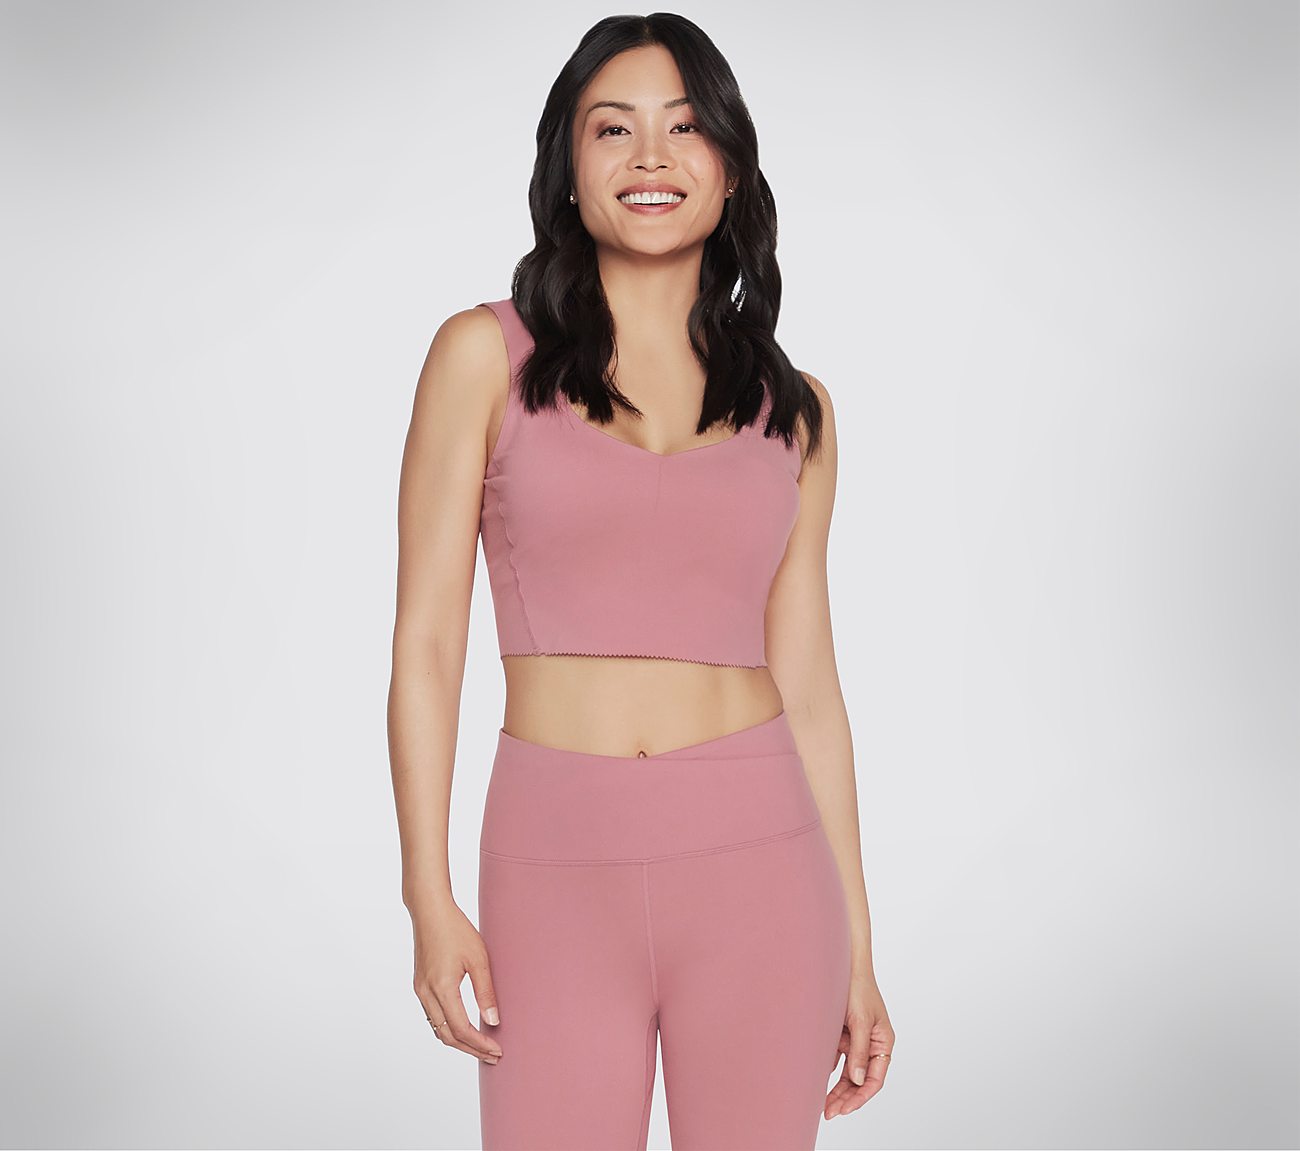 GOSCULPT SCALLOPED LONG LINE, MMAUVE Apparel Lateral View